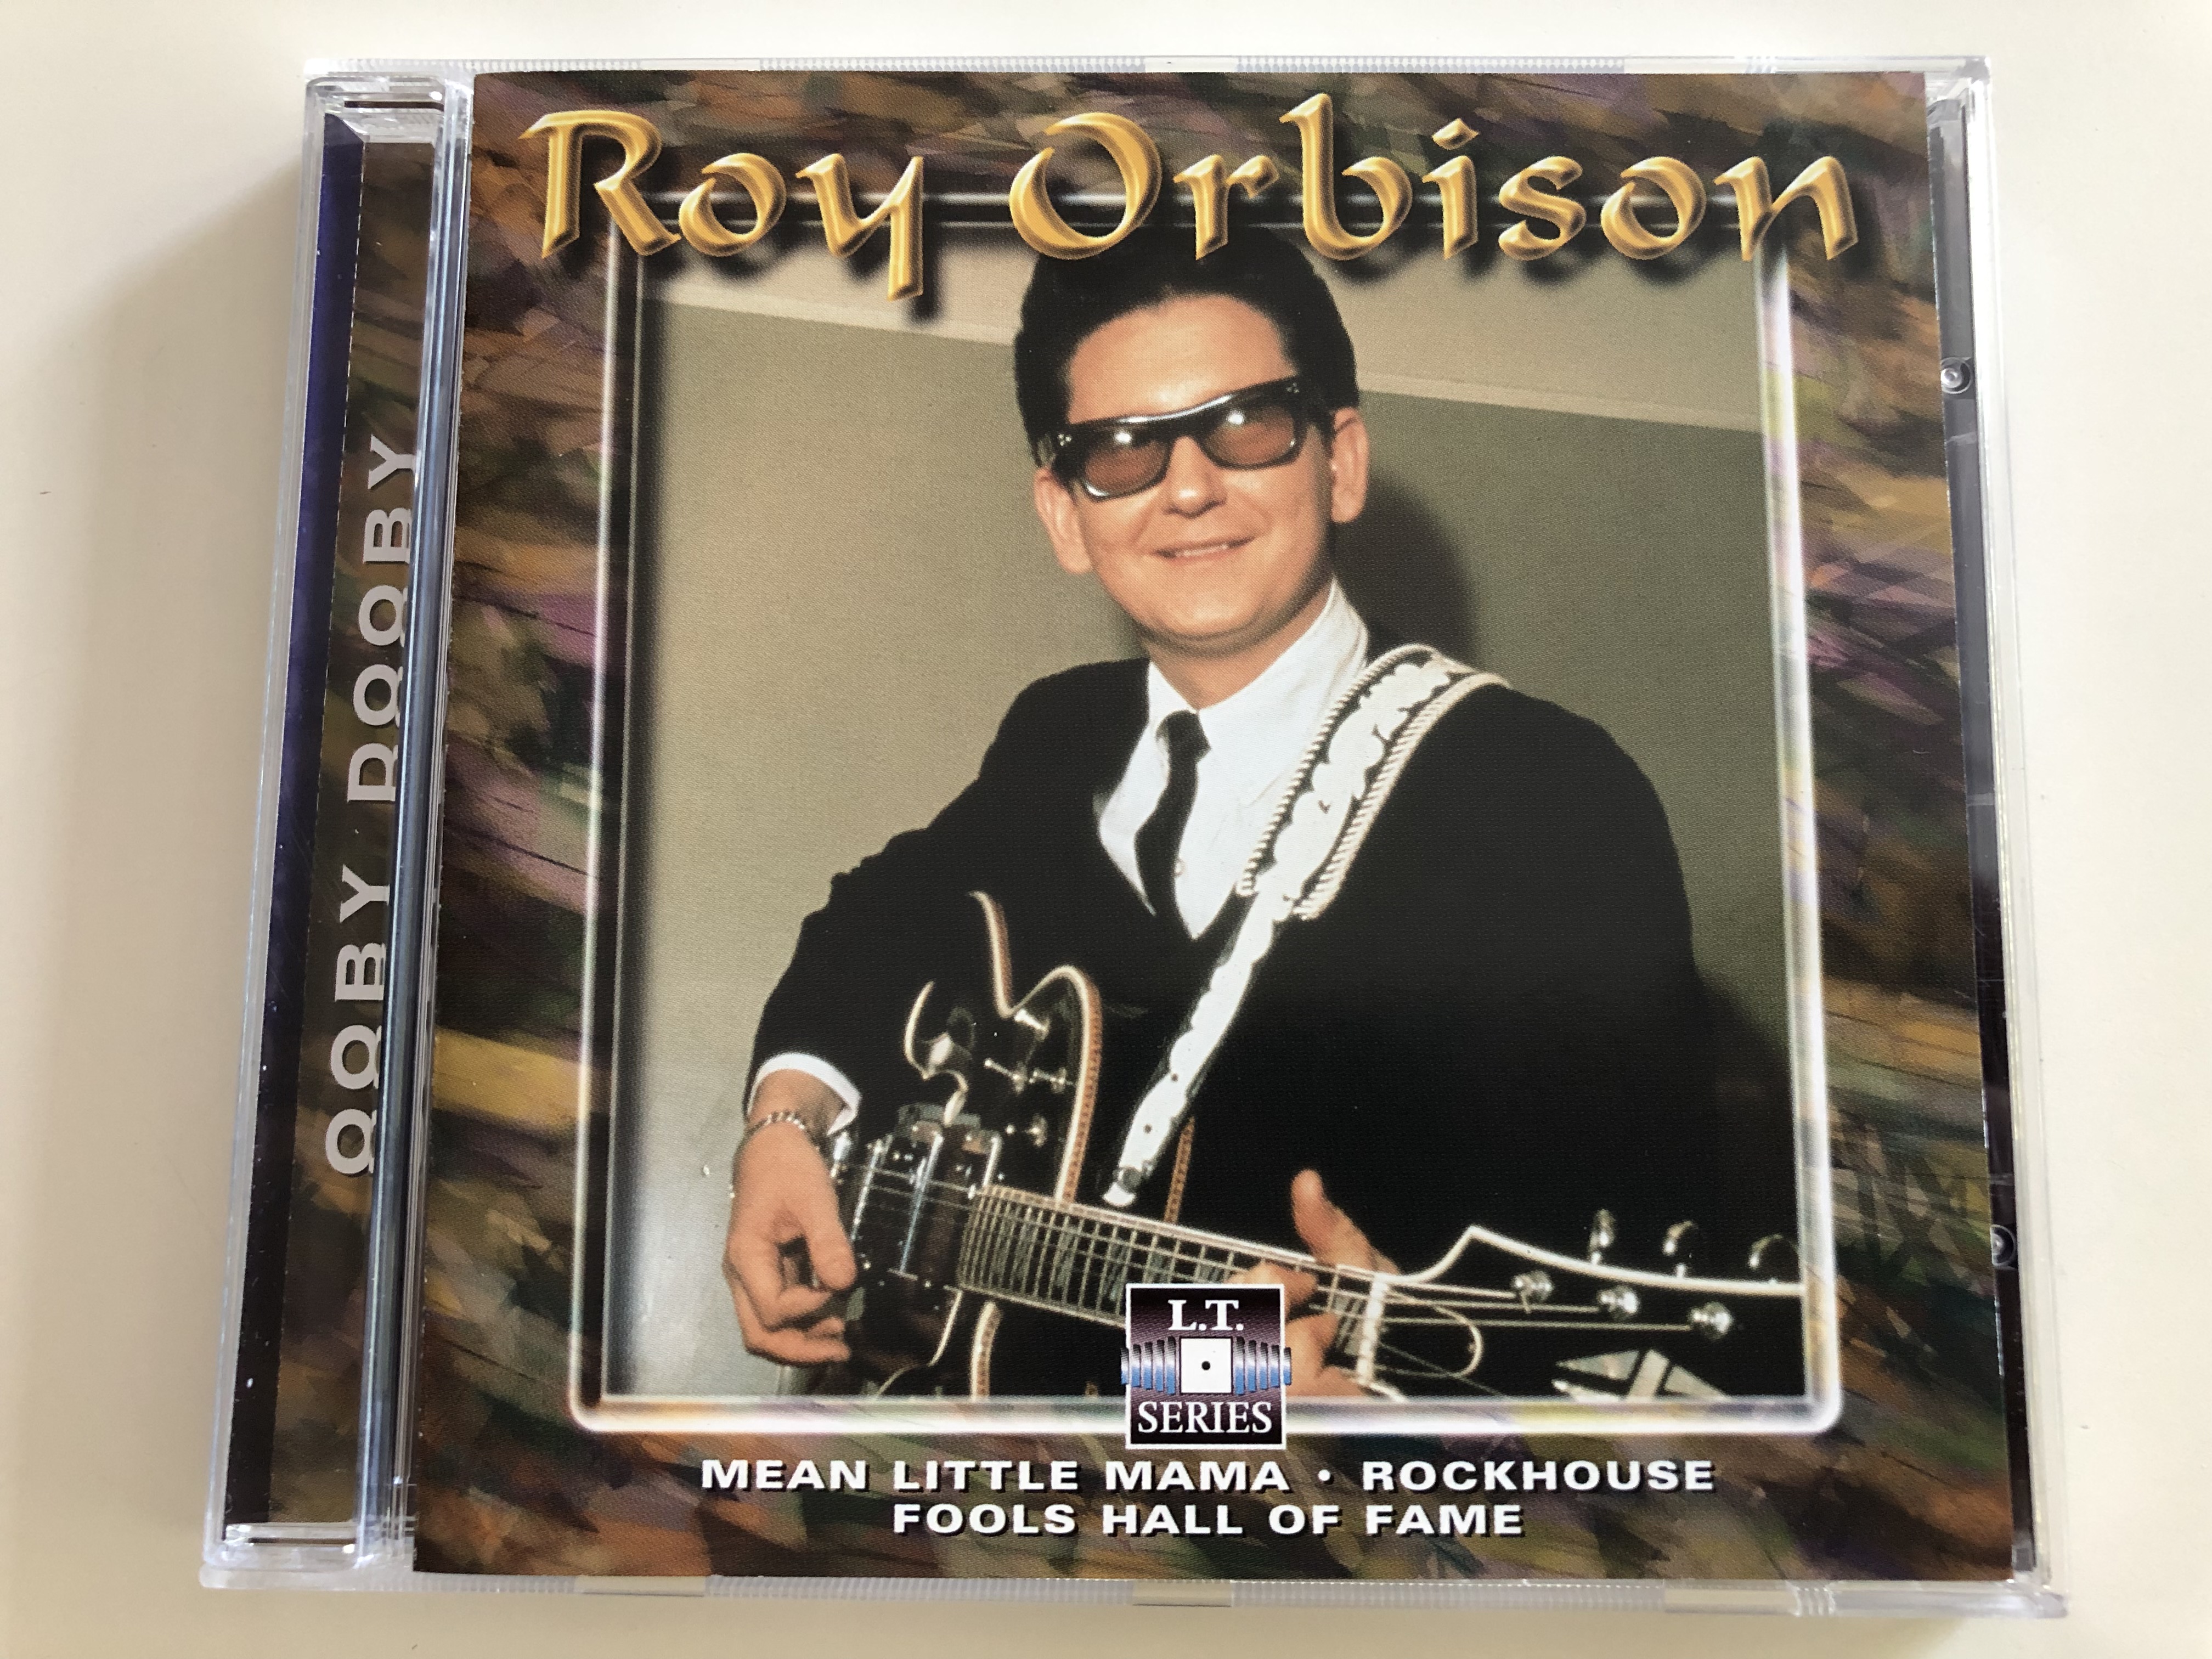 roy-orbison-ooby-dooby-mean-little-mama-rockhouse-fools-hall-of-fame-lt-5128-audio-cd-1999-1-.jpg